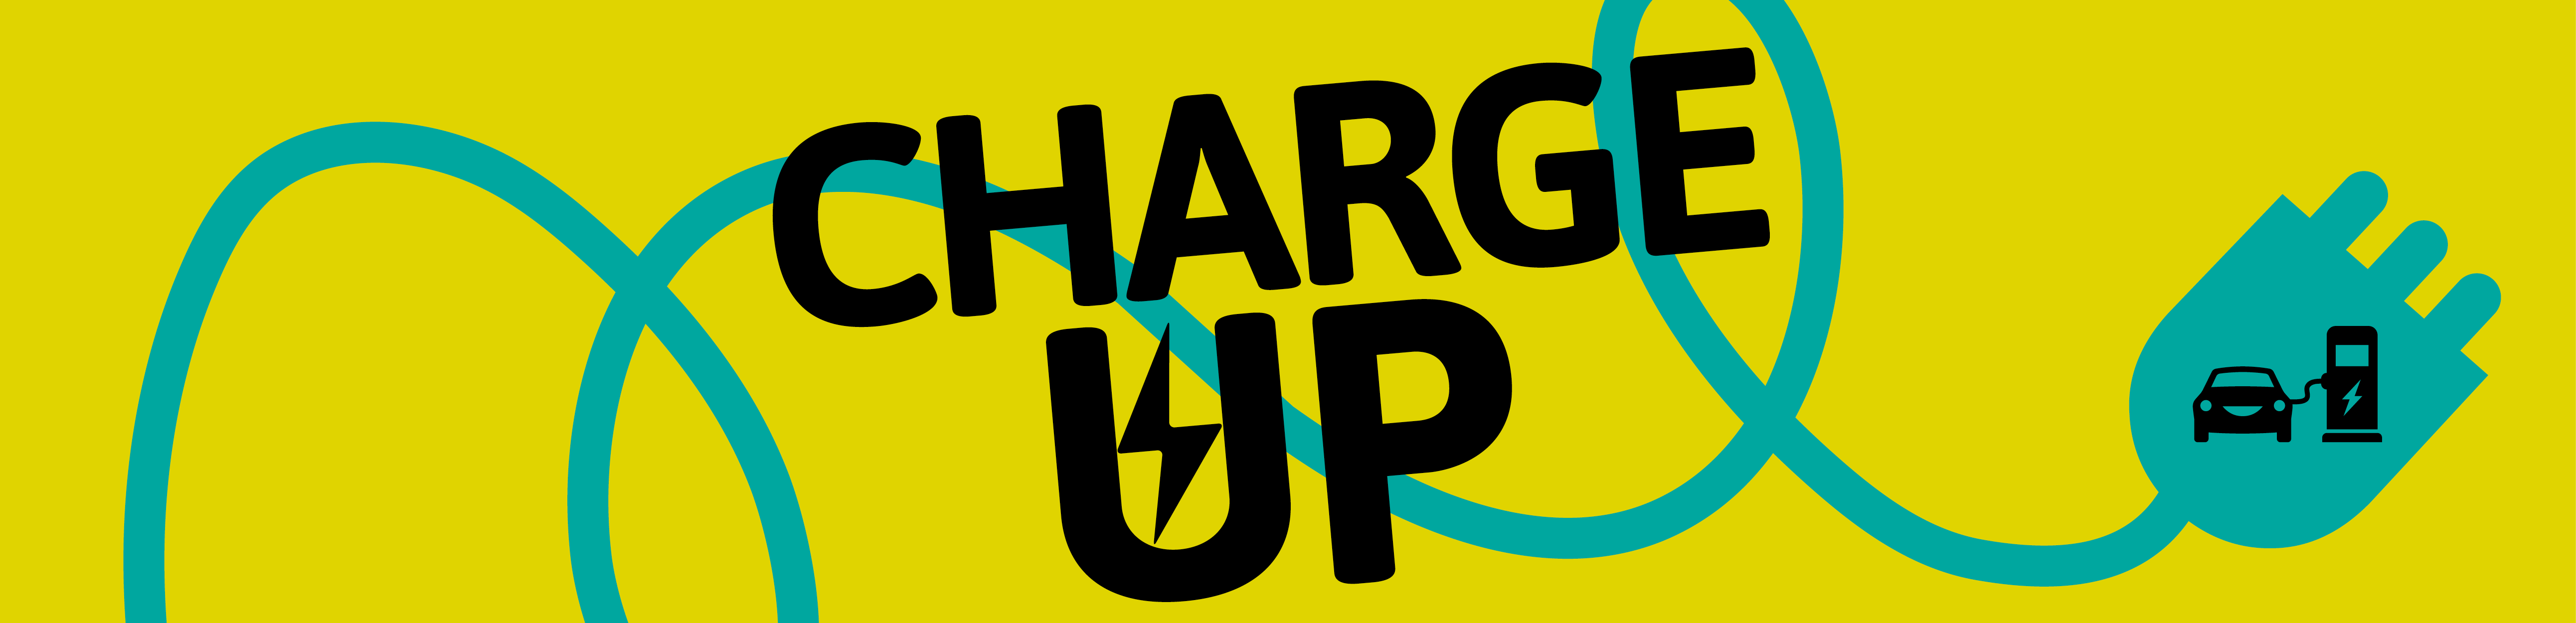 Charge Up Charging Grant Banner